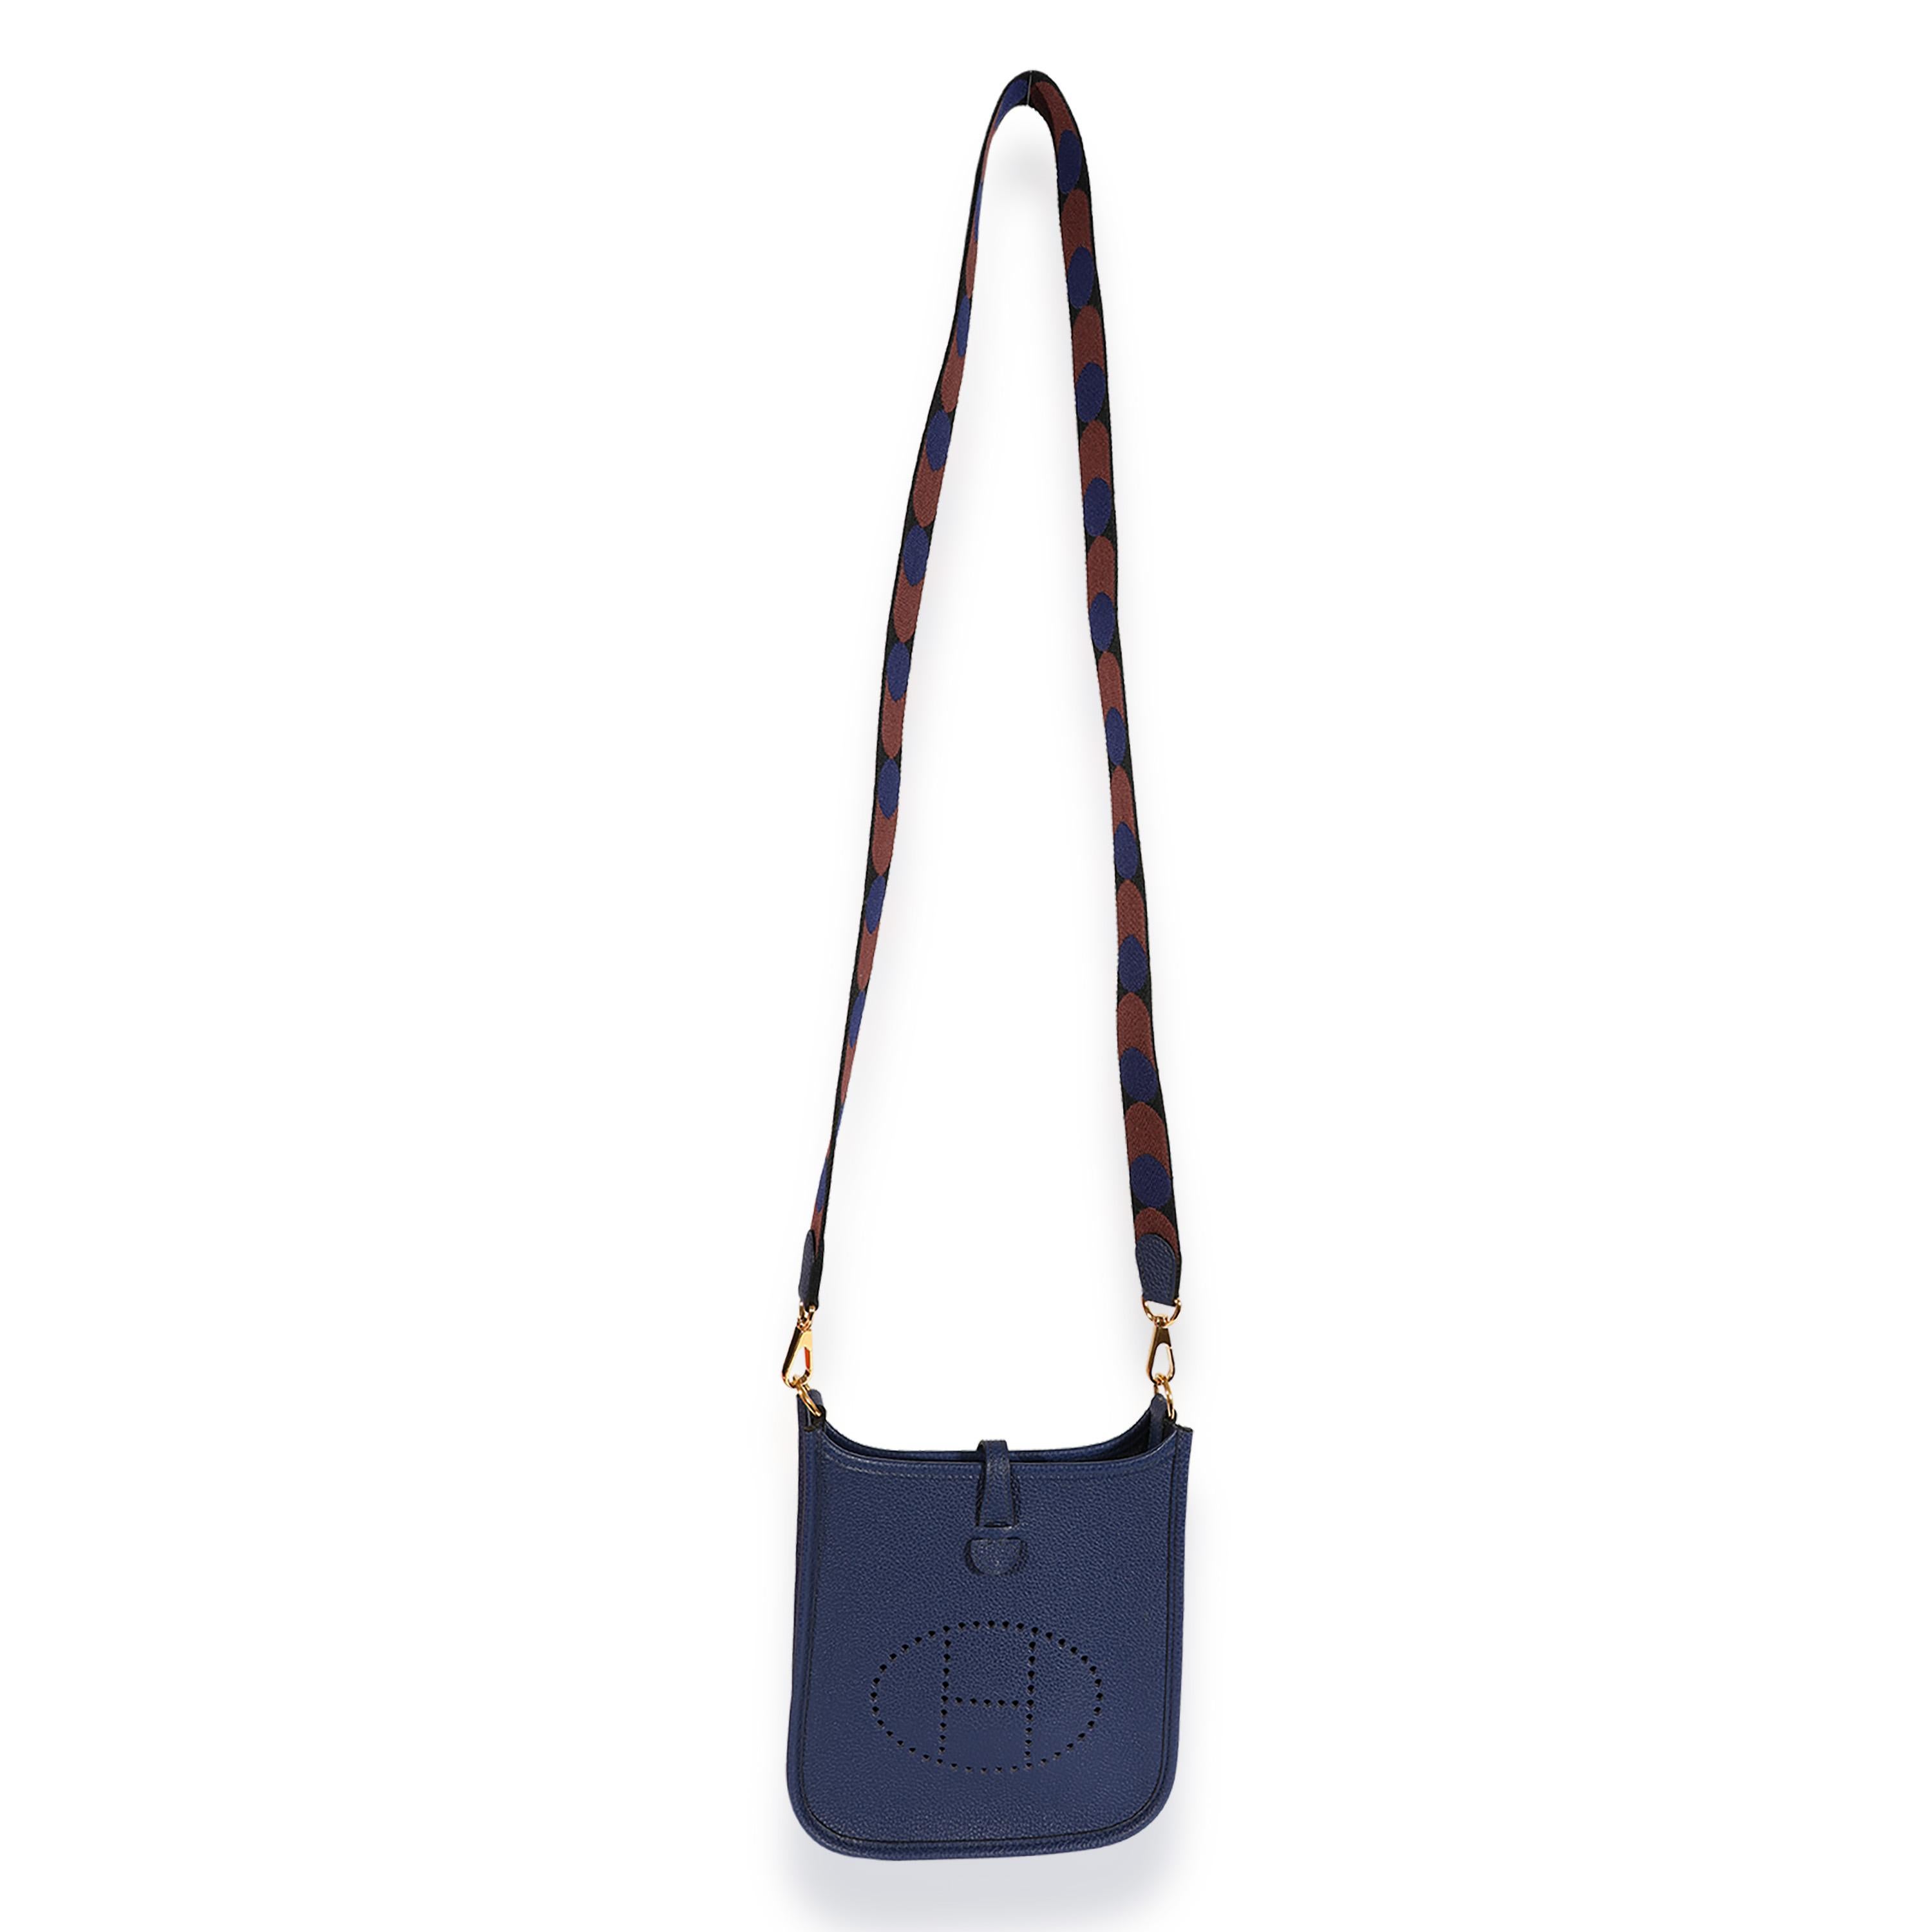 Listing Title: Hermès Bleu Saphir Maurice Flipperball Evelyne TPM GHW
SKU: 123642
Condition: Pre-owned 
Handbag Condition: Excellent
Condition Comments: Excellent Condition. Light nap to interior. No other visible signs of wear.
Brand: Hermès
Model: